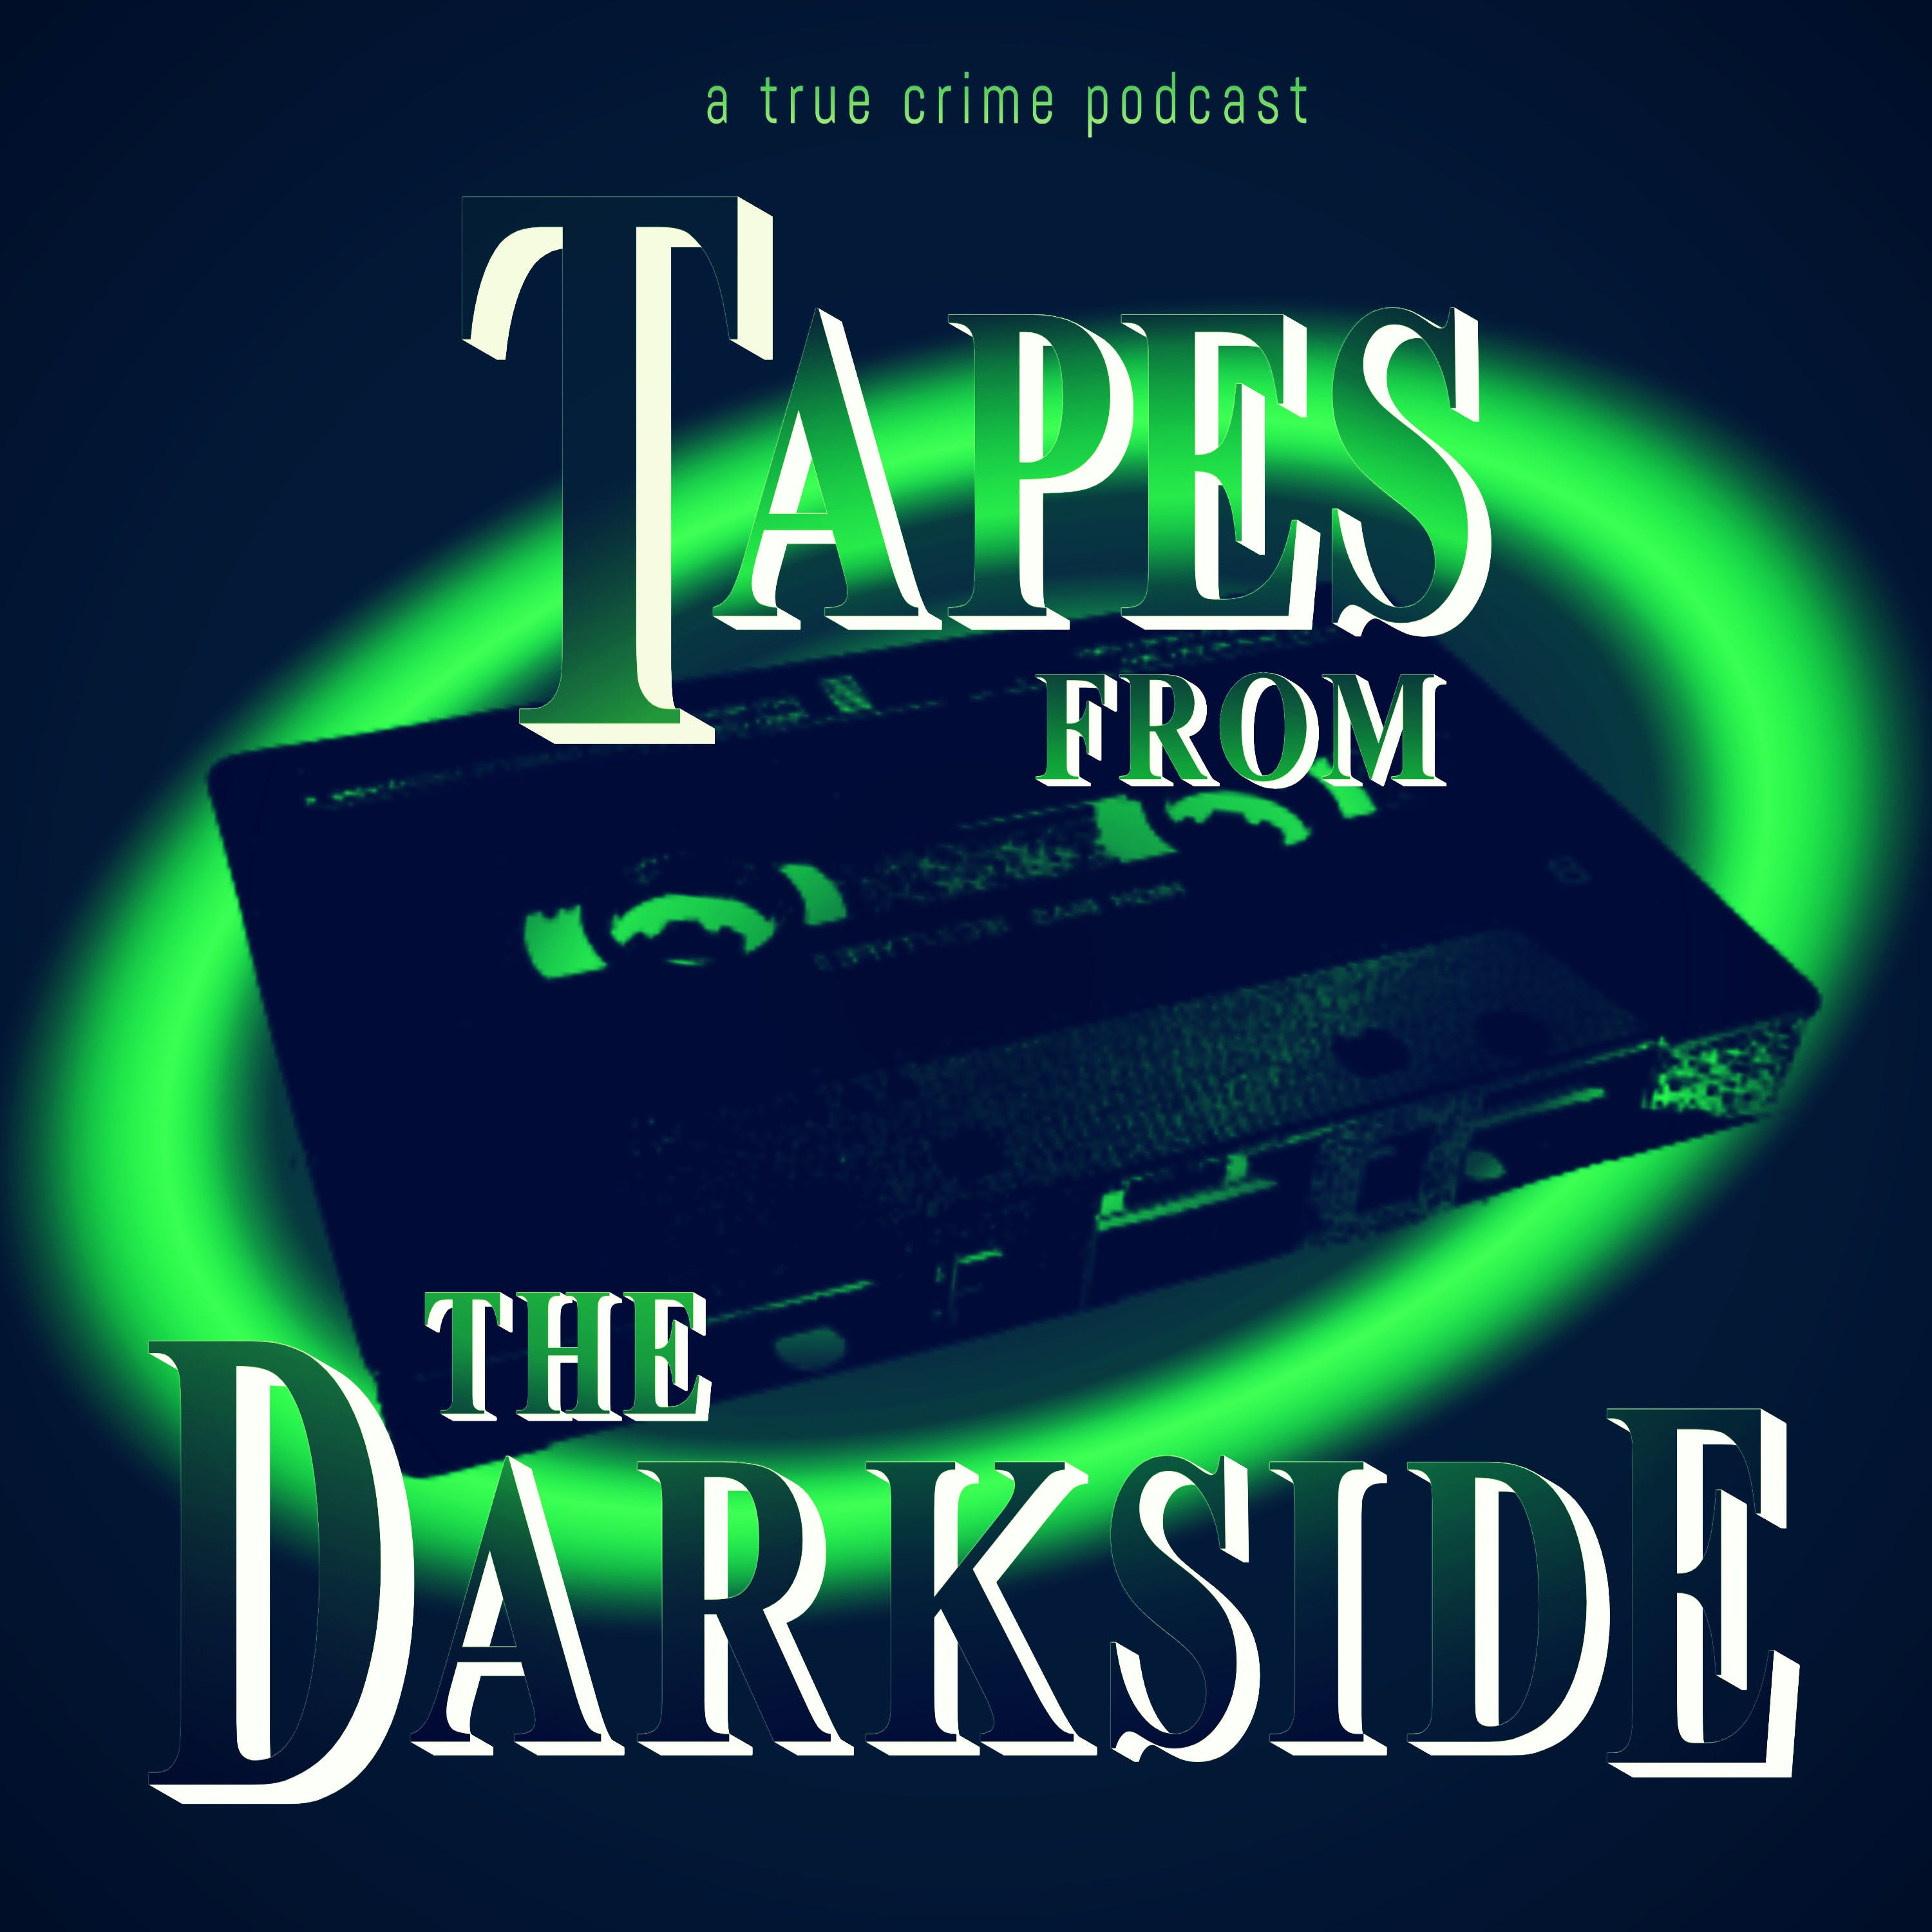 Introducing: Tapes From the Darkside